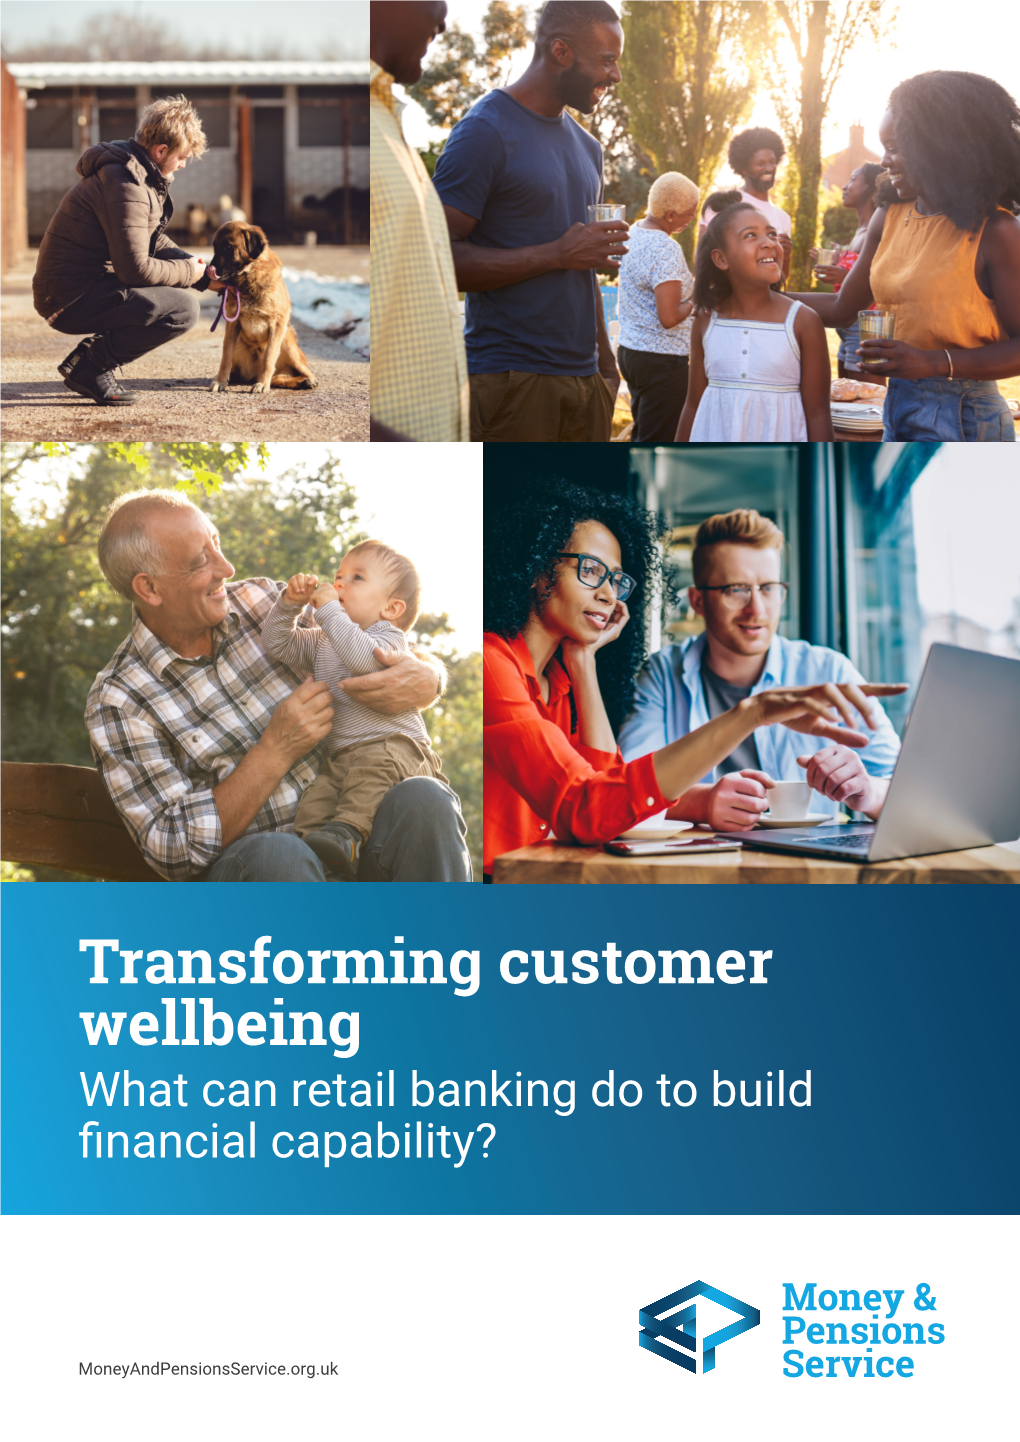 Transforming Customer Wellbeing What Can Retail Banking Do to Build Fnancial Capability?